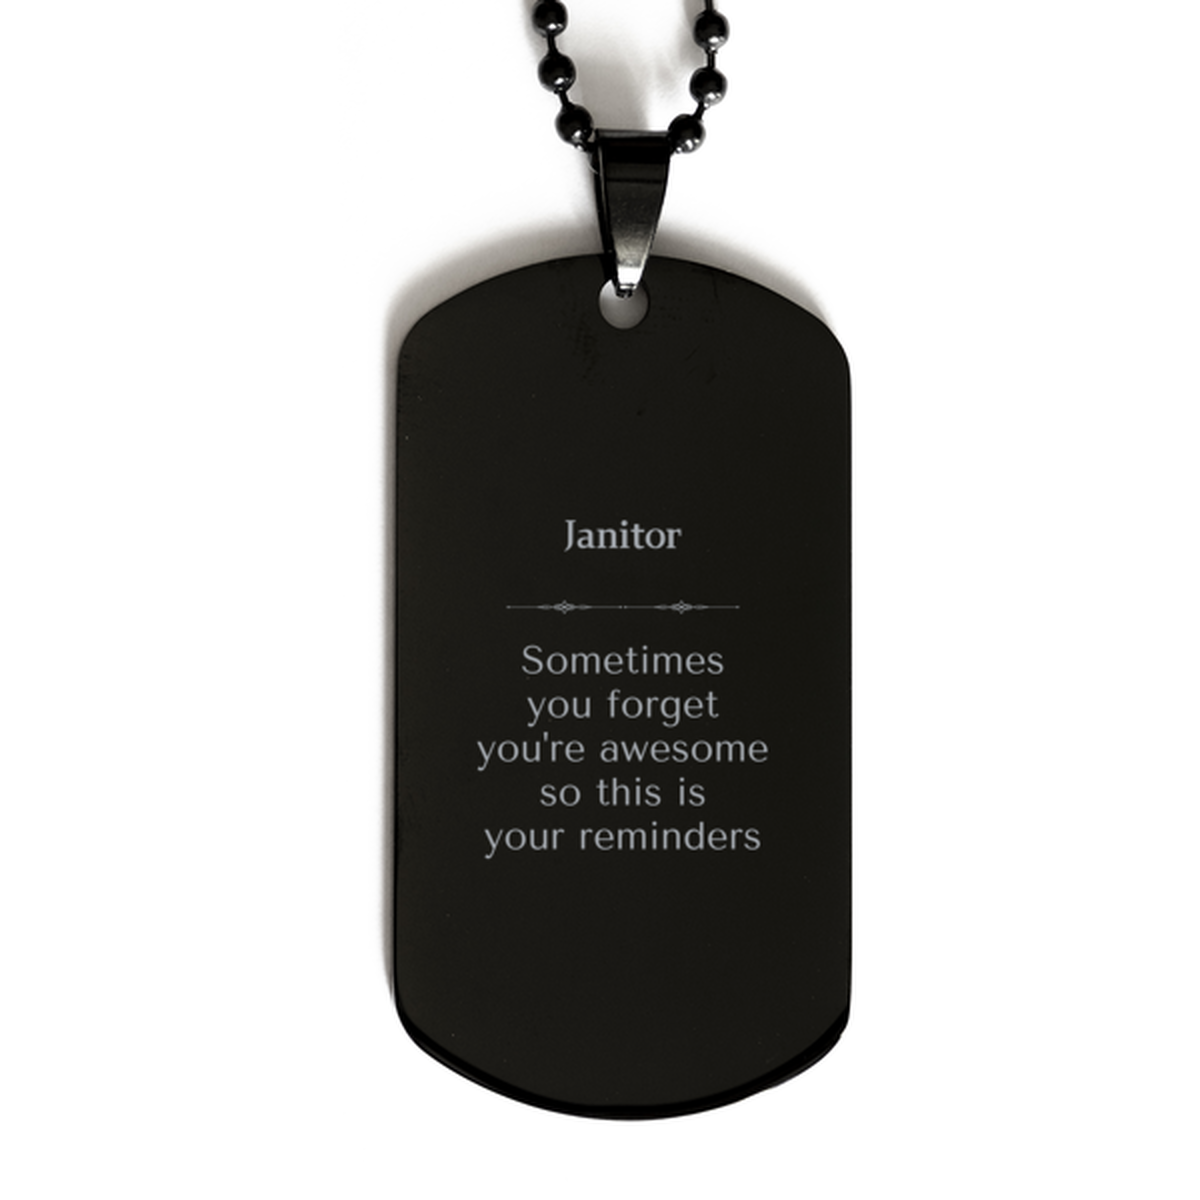 Sentimental Janitor Black Dog Tag, Janitor Sometimes you forget you're awesome so this is your reminders, Graduation Christmas Birthday Gifts for Janitor, Men, Women, Coworkers